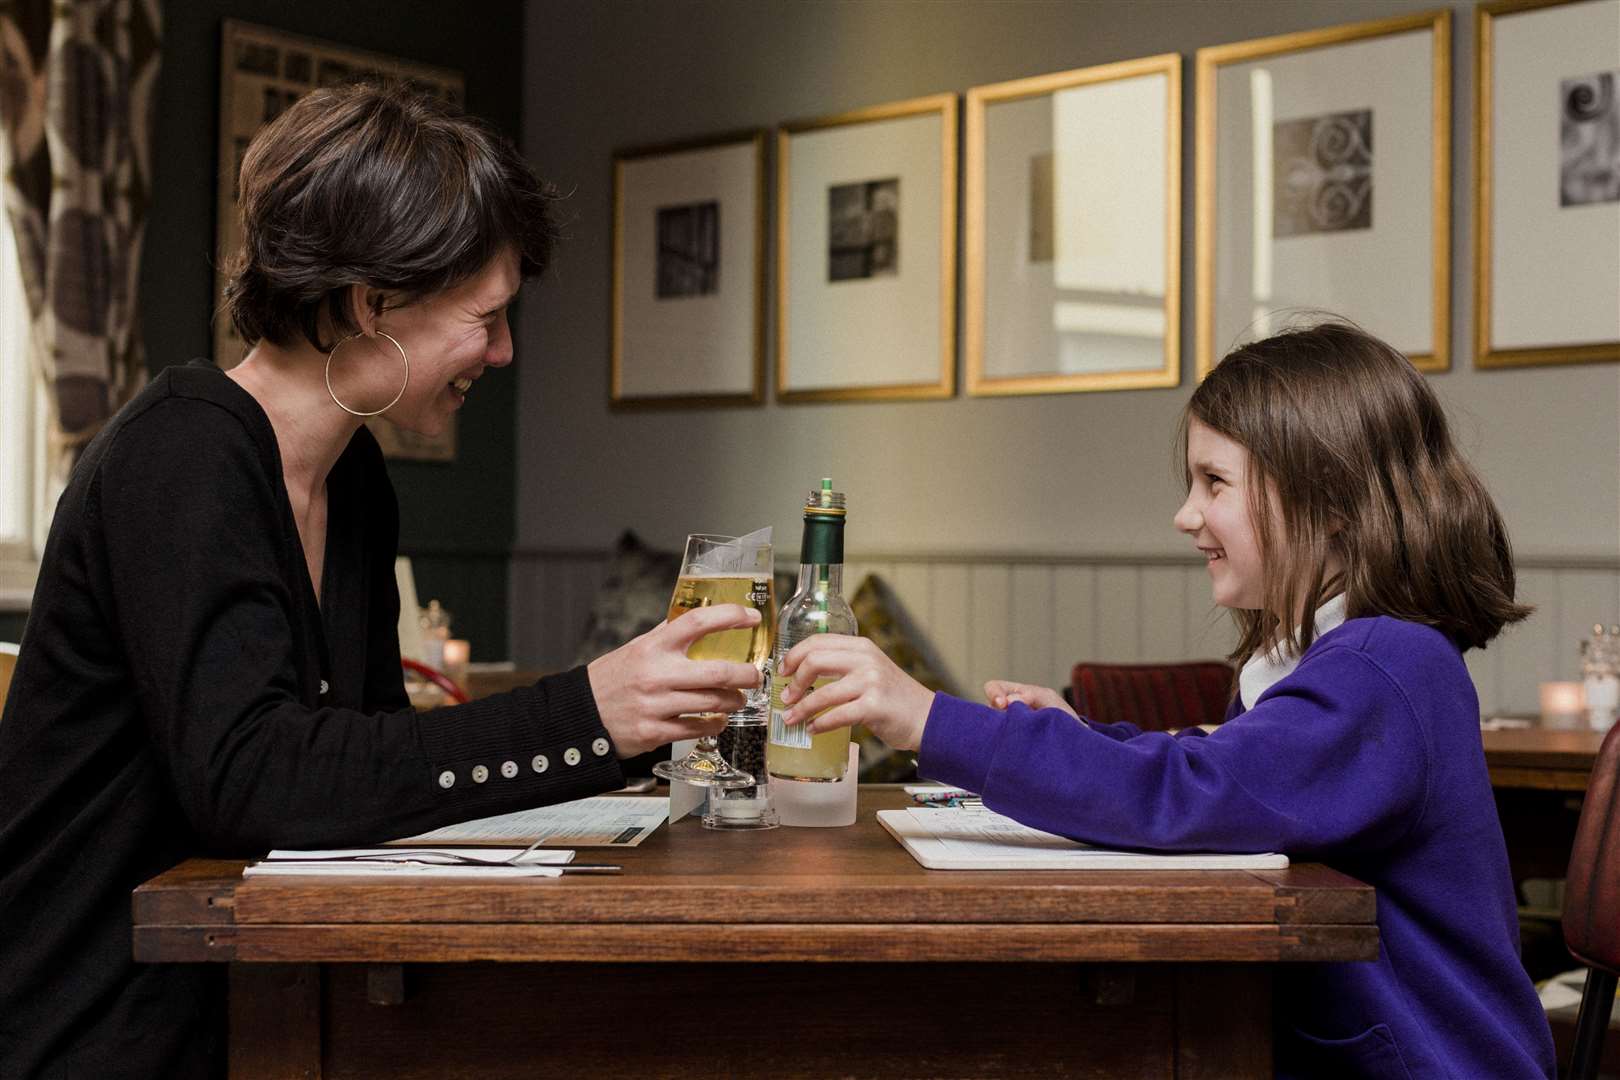 A child can have a free main course, desert and drink when an adult buys their meal